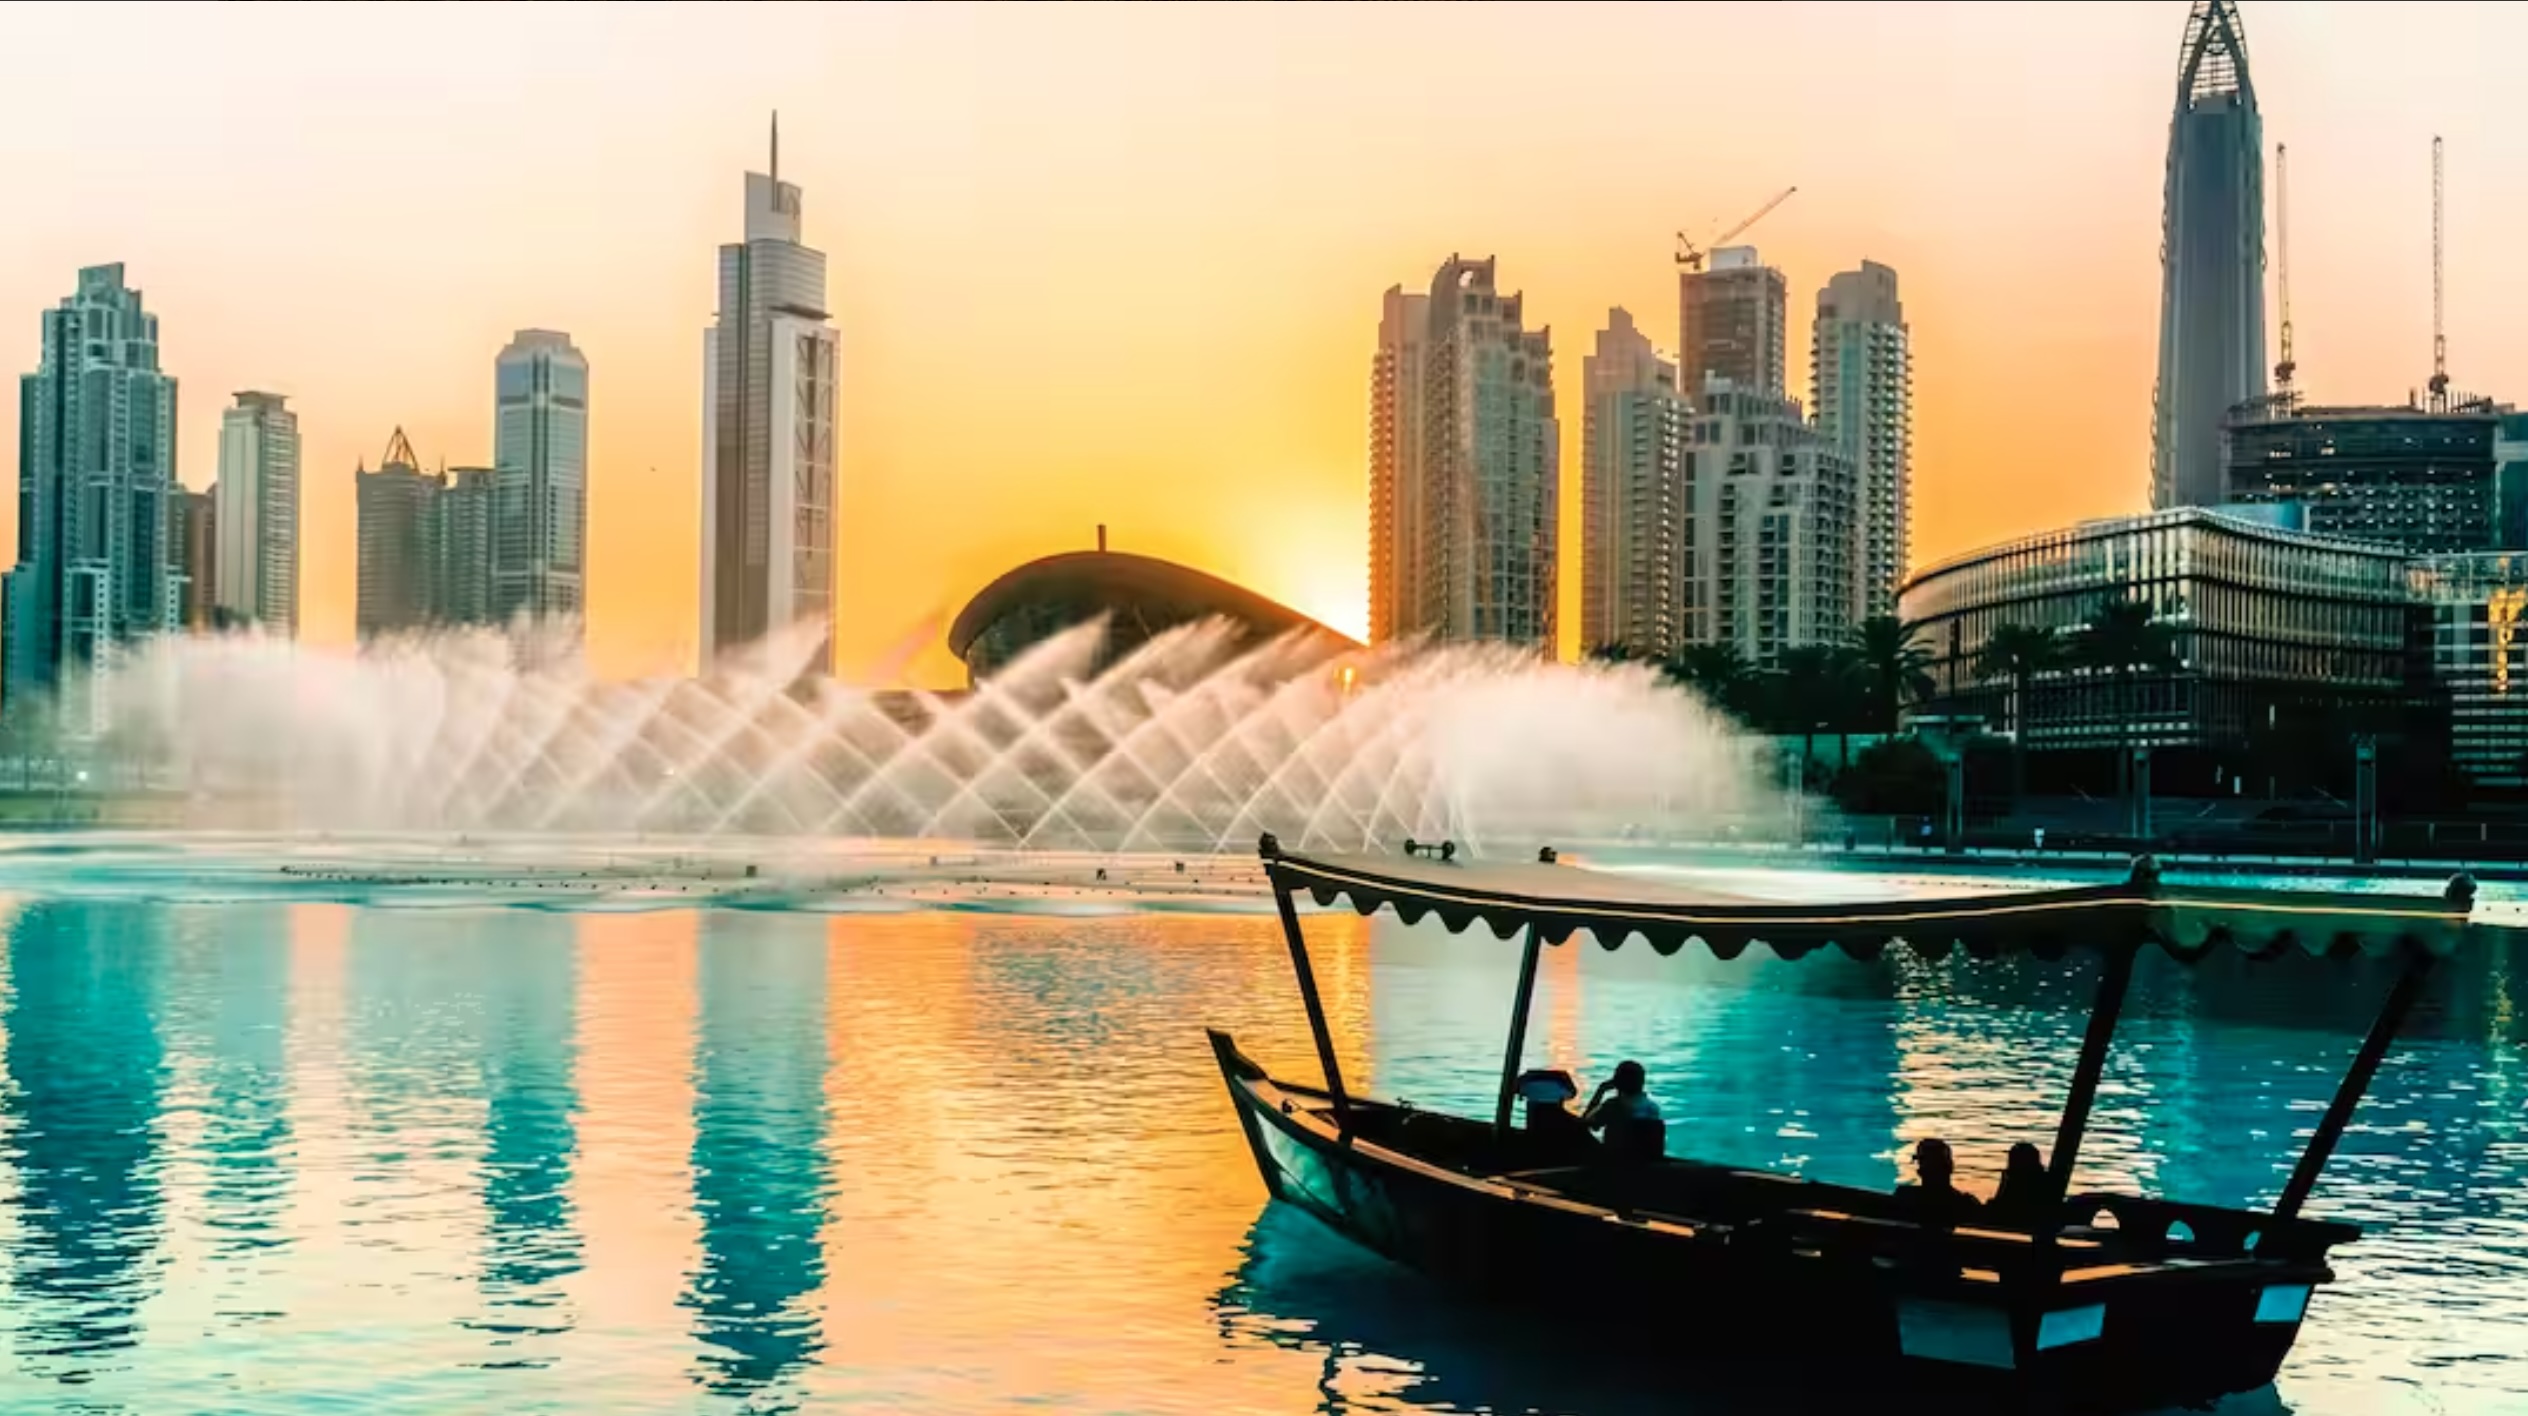 Why not take a boat trip to enjoy the Dubai fountain show at close quarters